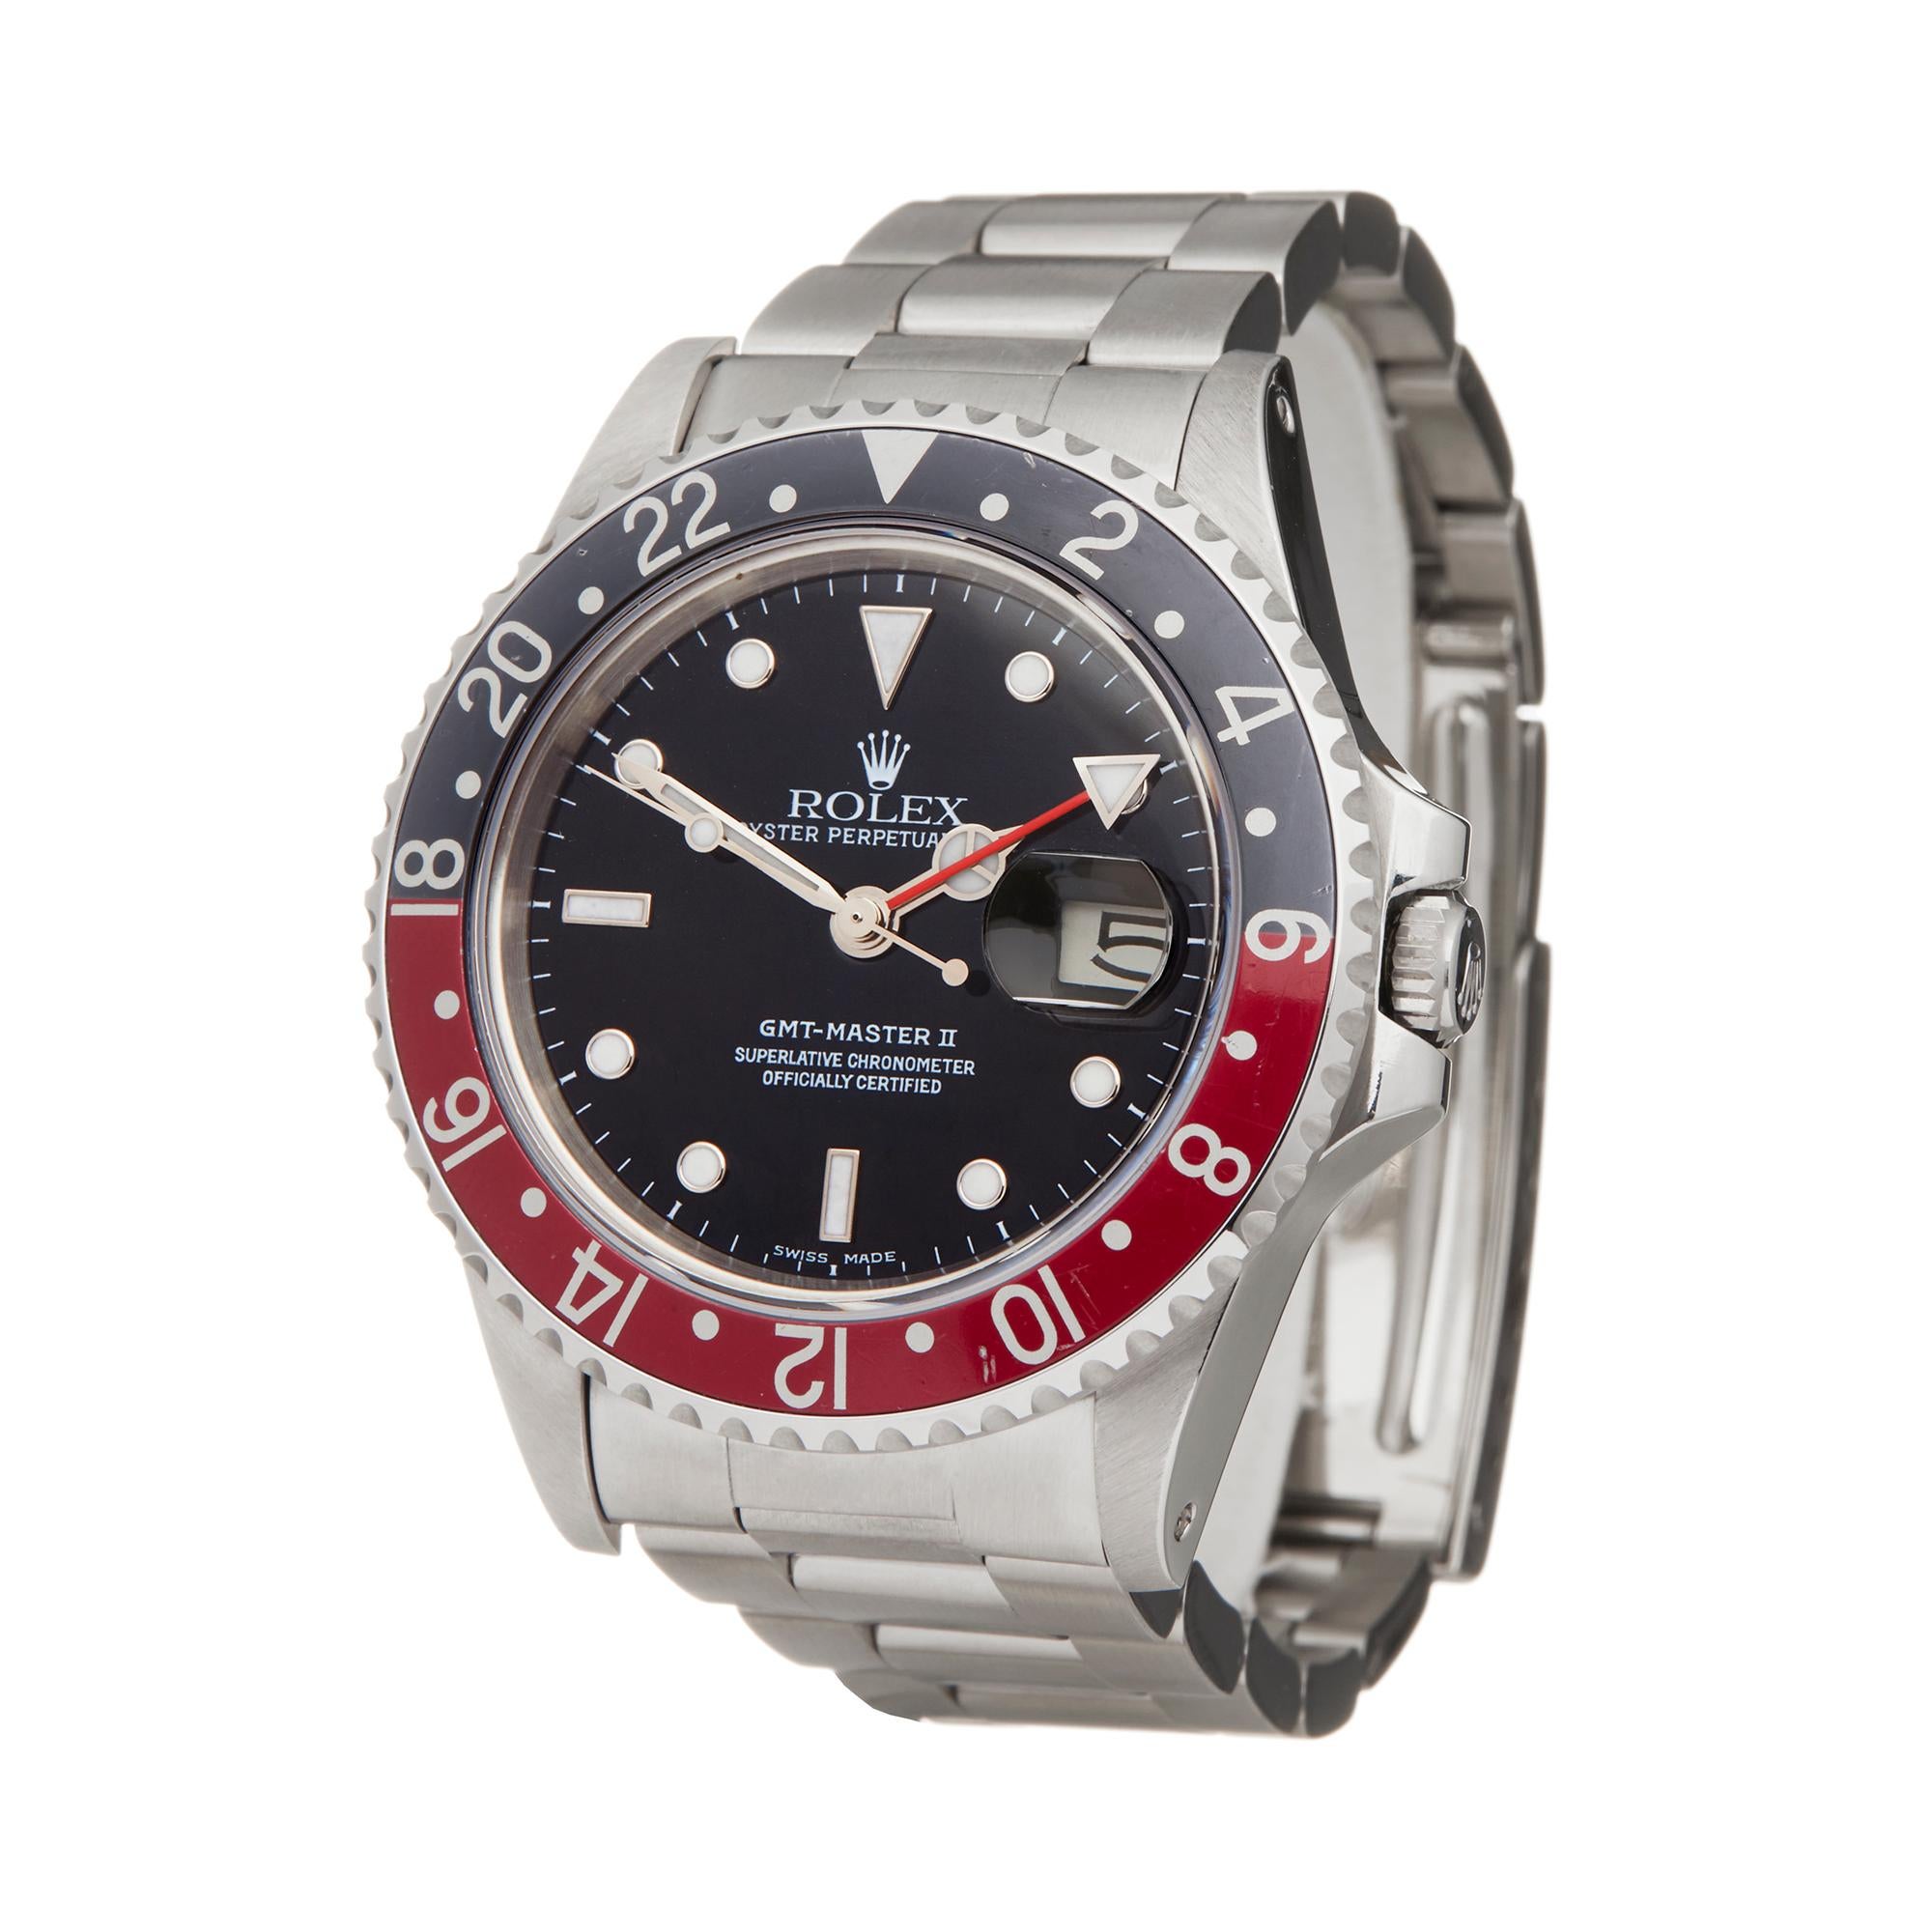 Reference: W6053
Manufacturer: Rolex
Model: GMT-Master II
Model Reference: 16760
Age: Circa 1984
Gender: Men's
Box and Papers: Box Only
Dial: Black Other
Glass: Sapphire Crystal
Movement: Automatic
Water Resistance: To Manufacturers